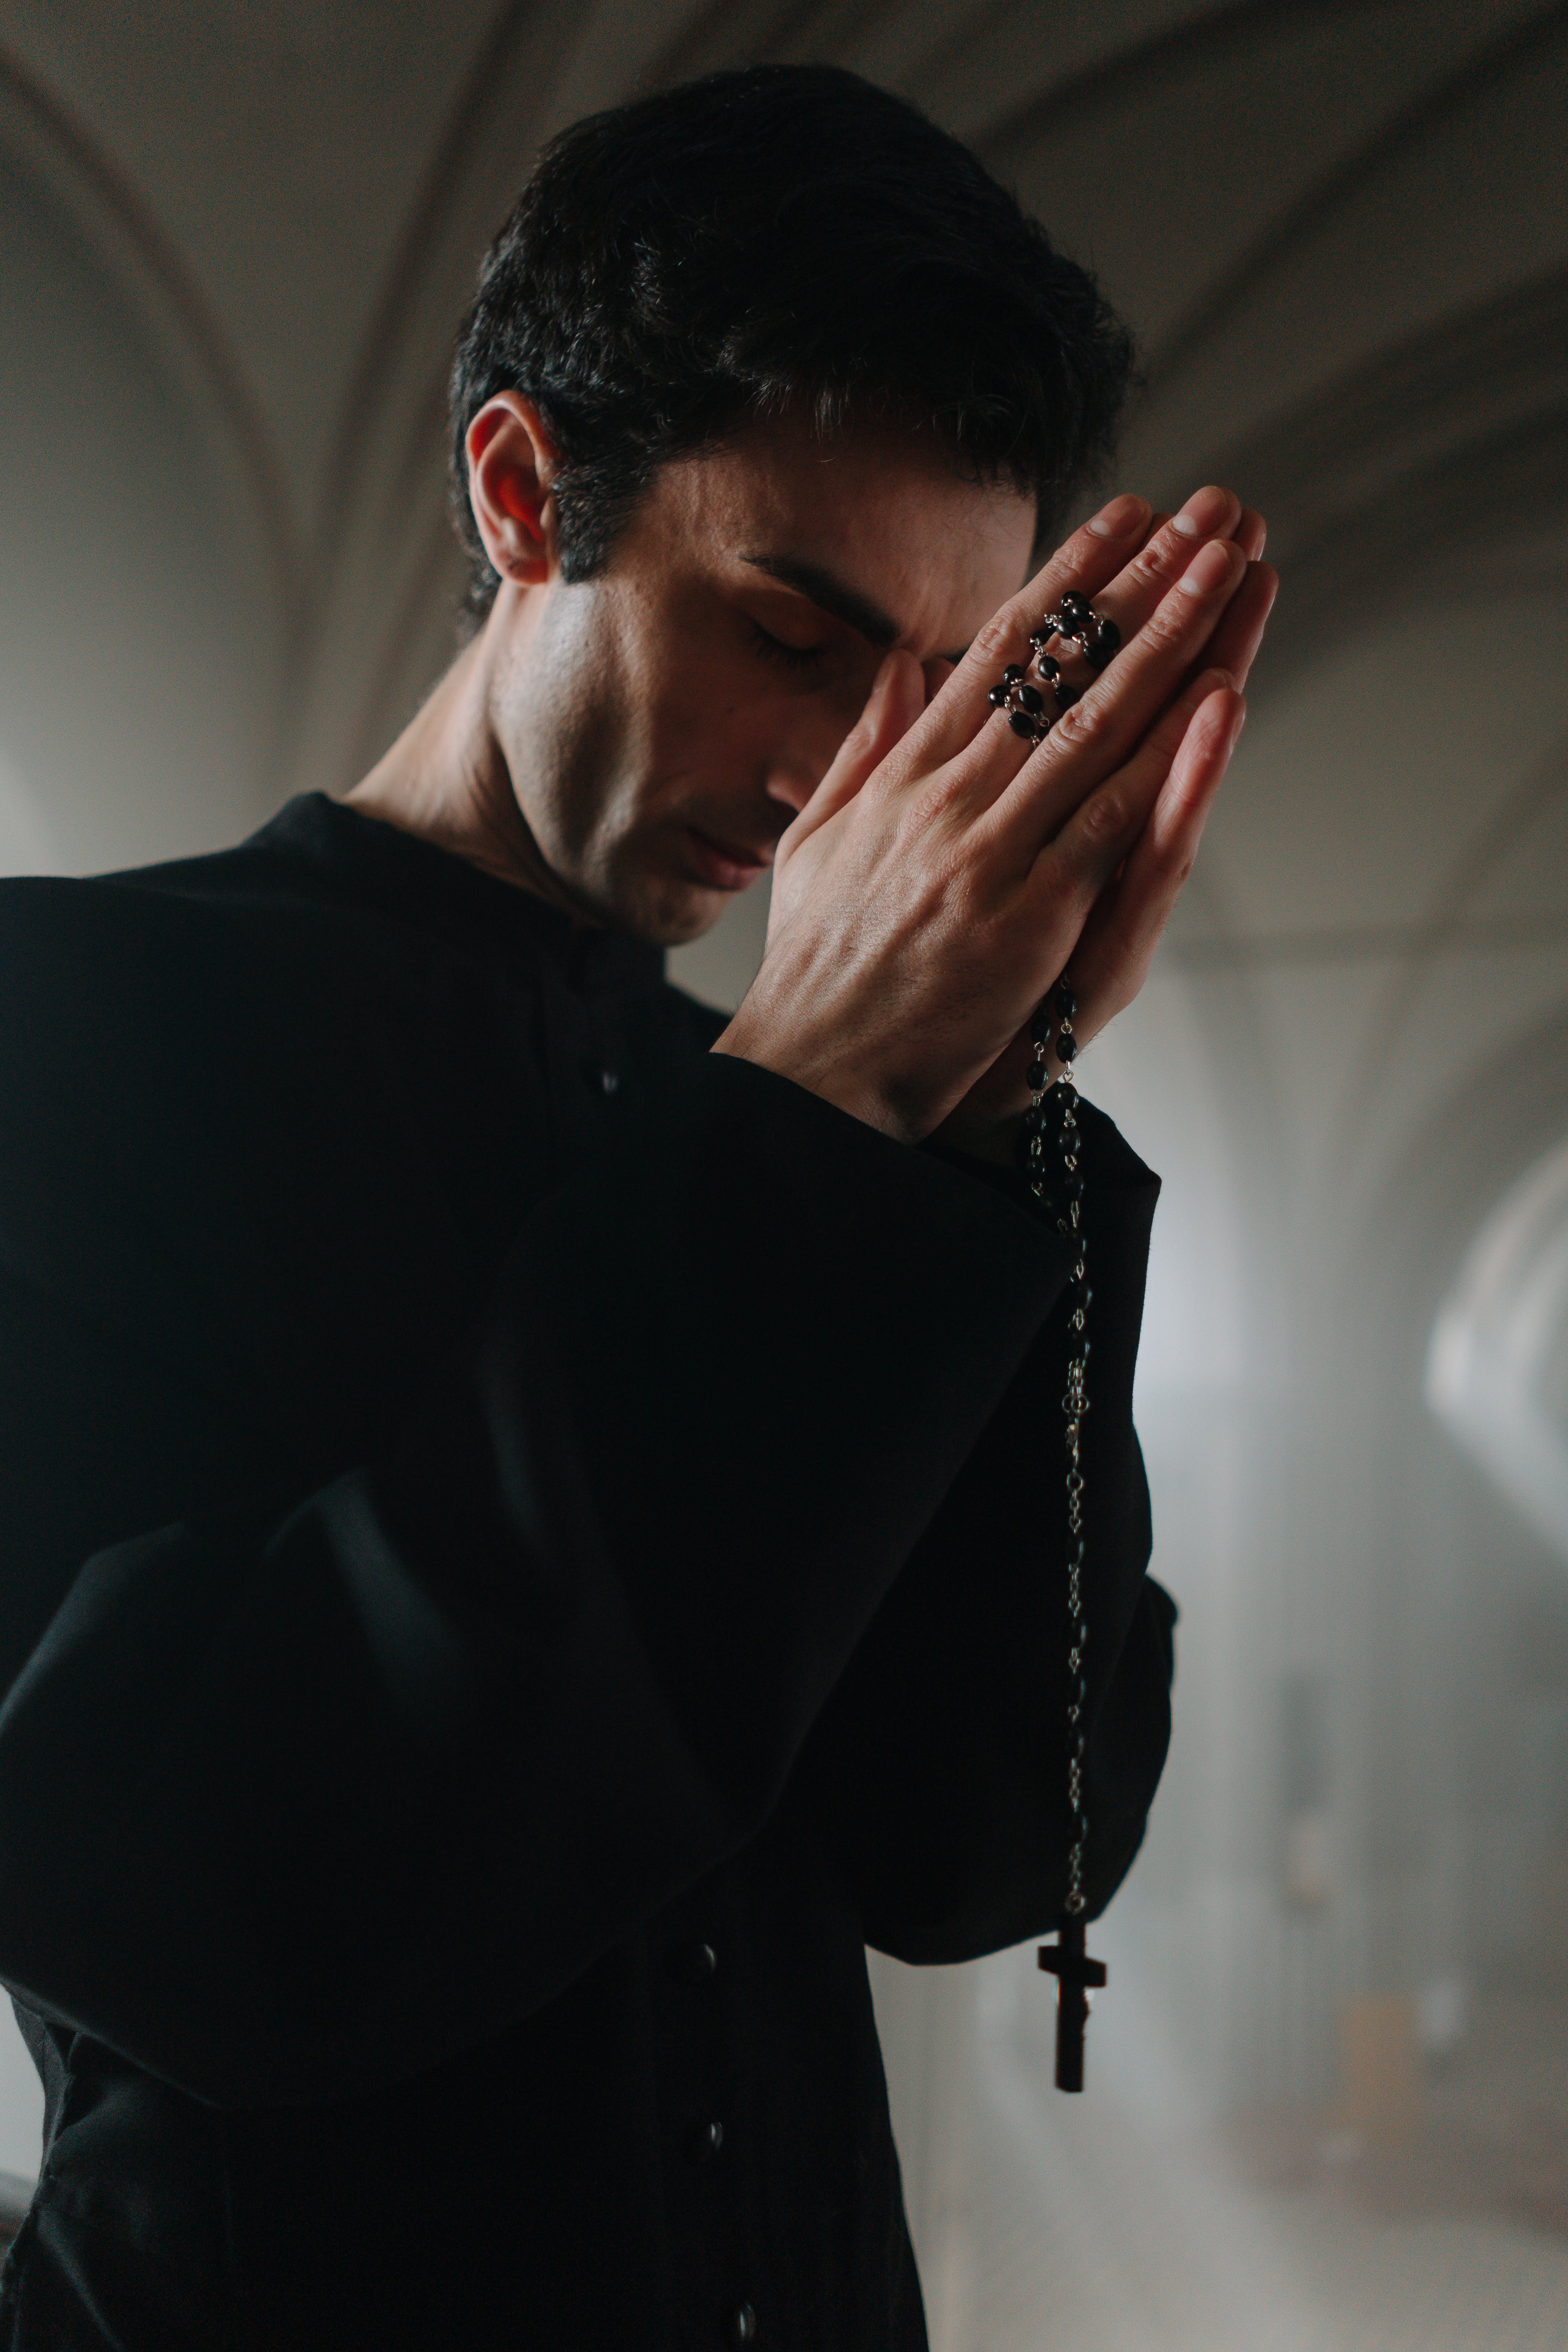 A man praying holding a rosary. | Source: Pexels